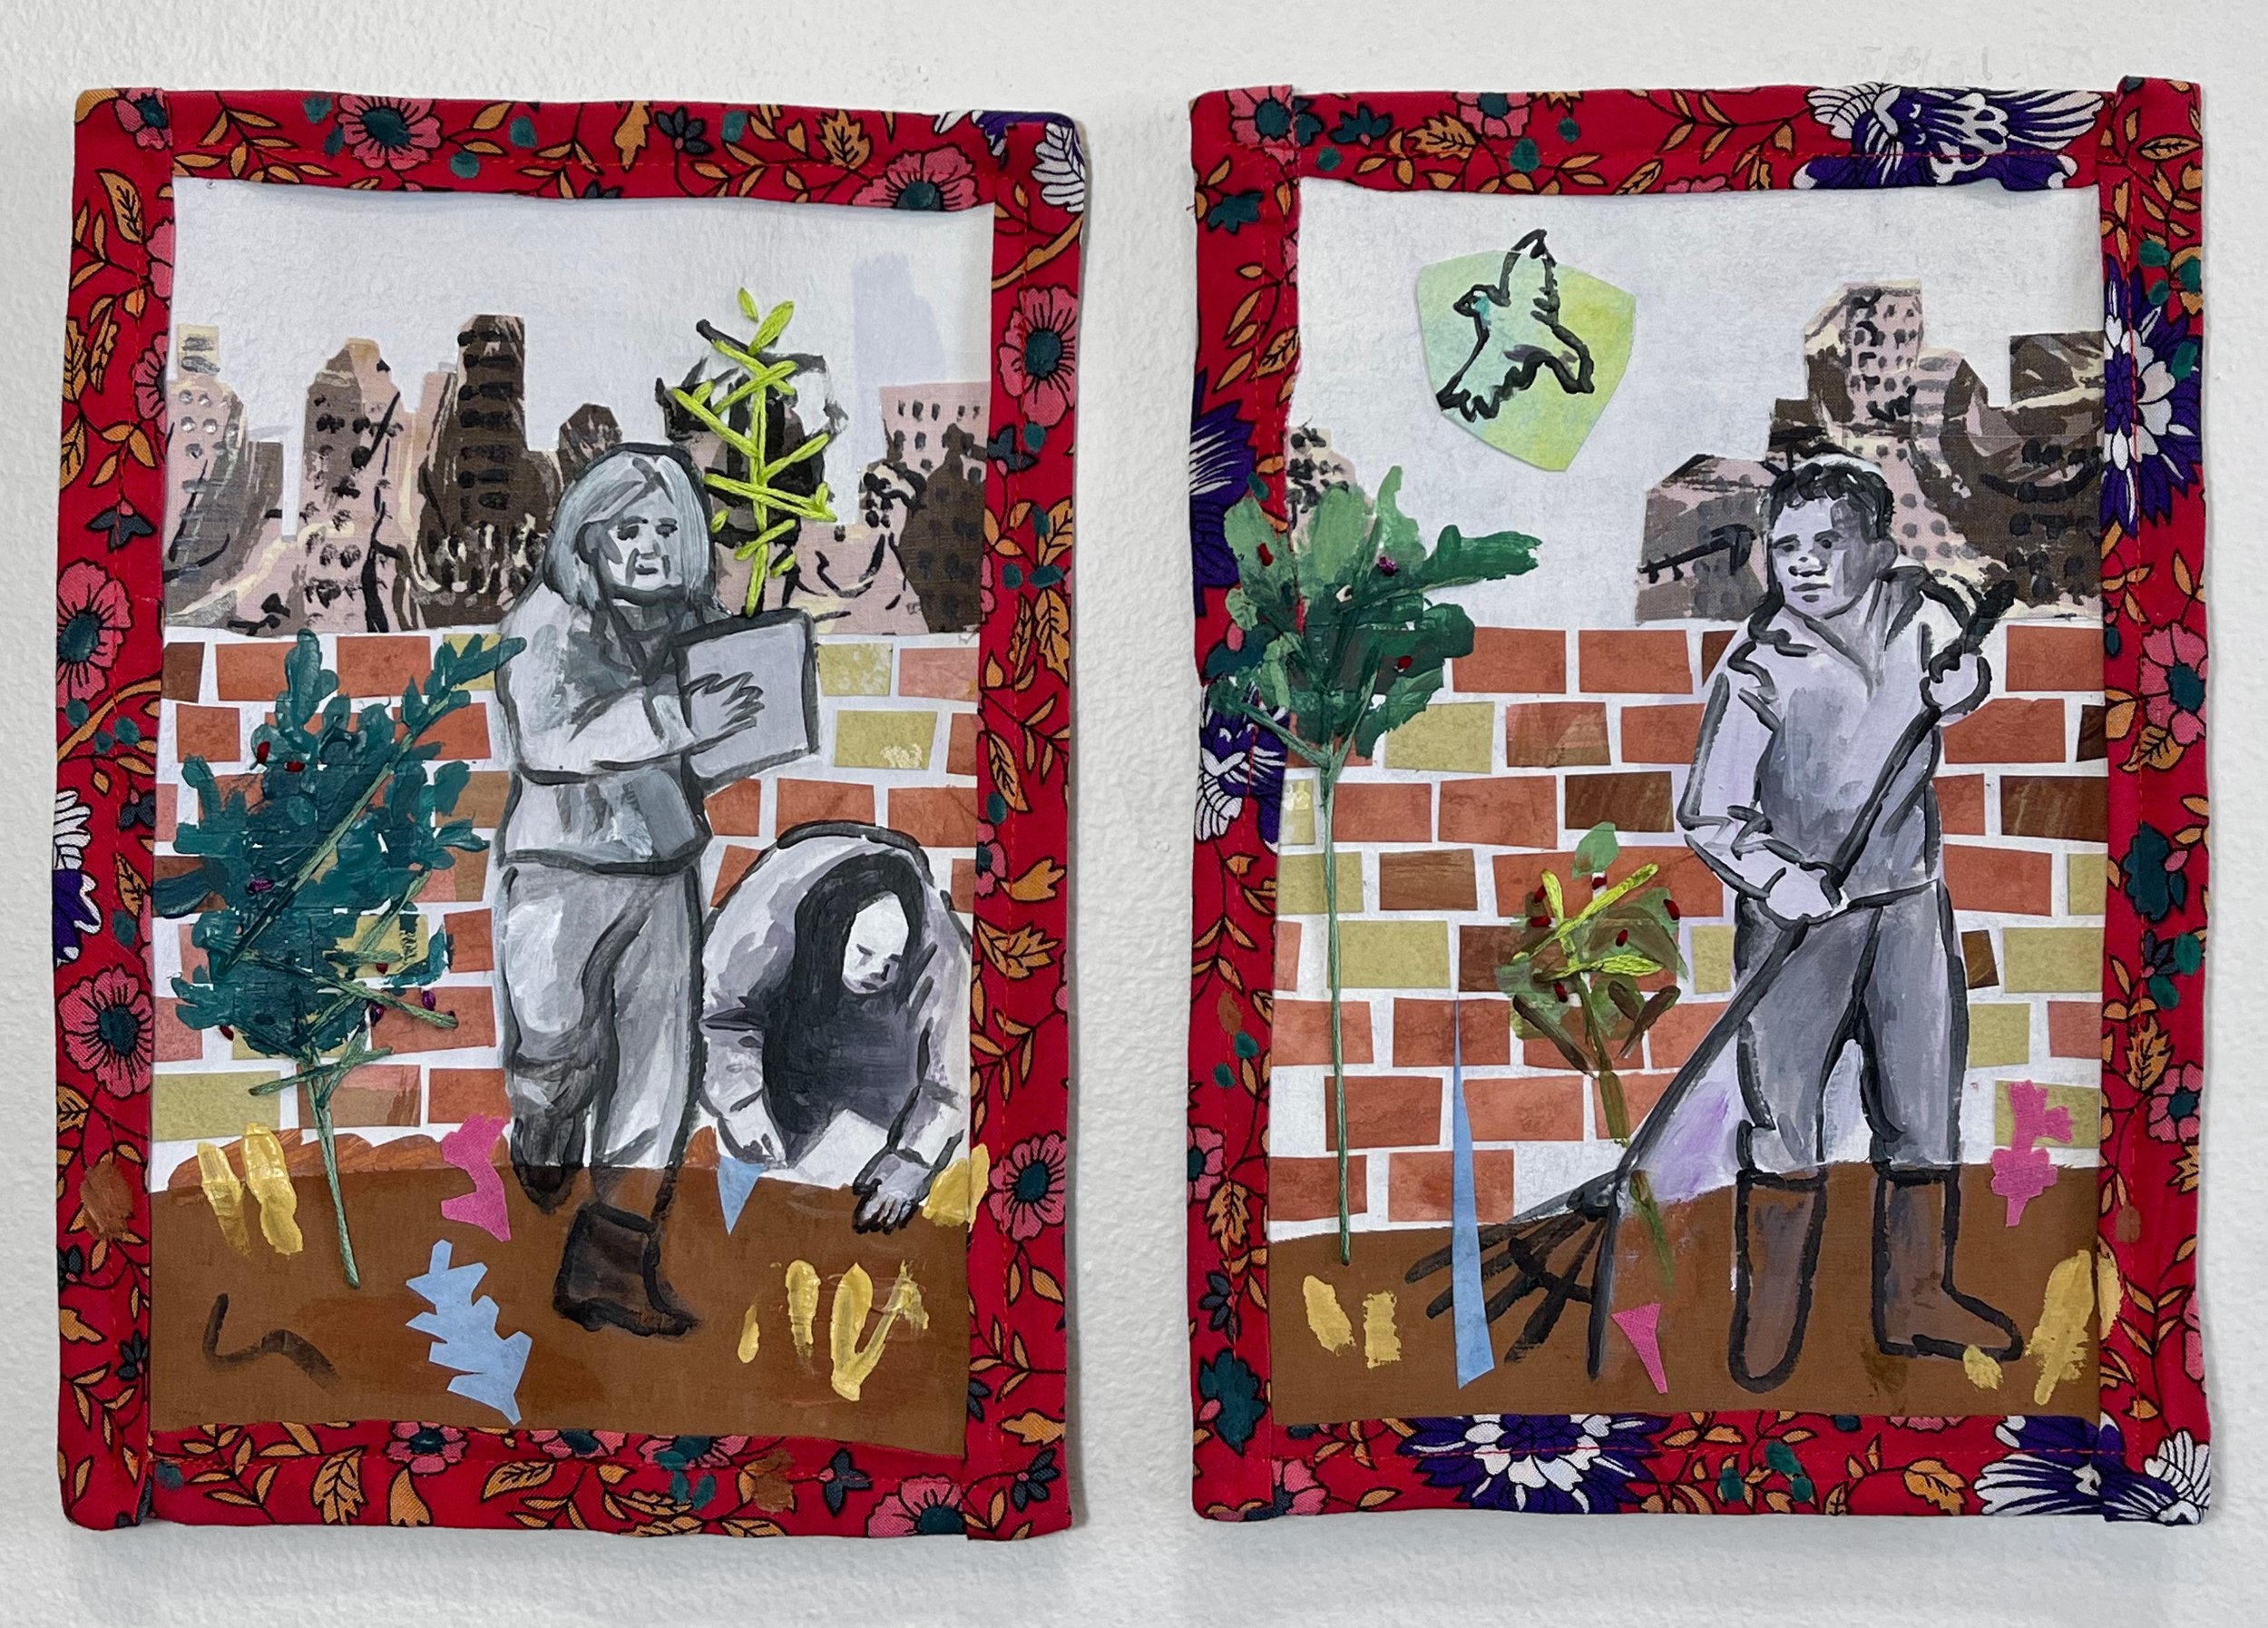  “City Roots 4 (diptych)”, 10”h x 15”w, Acrylic and embroidery on paper and fabric, 2023   